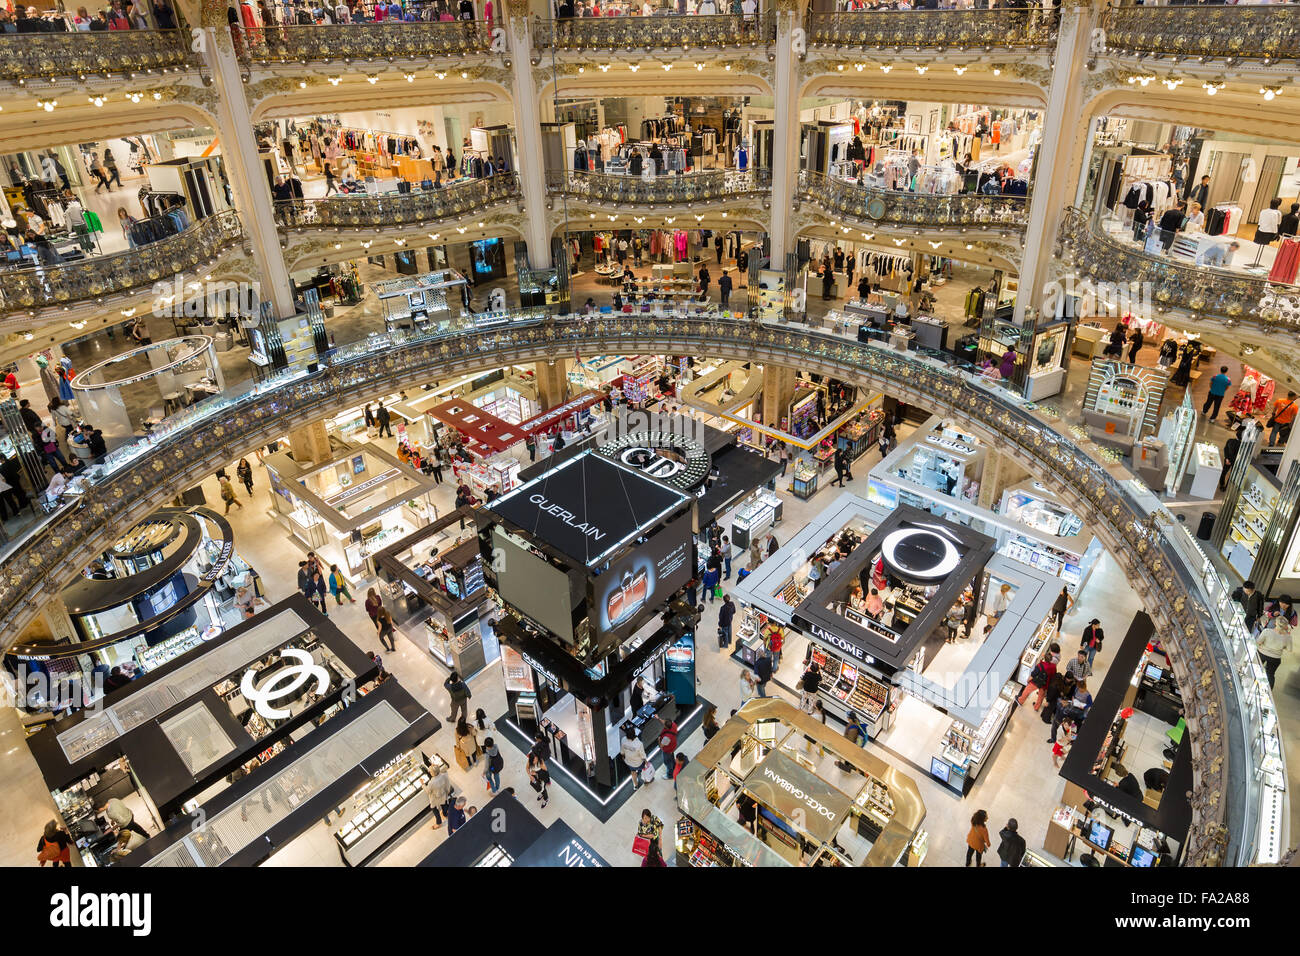 PARIS, FRANCE - MAY 29: Unknown people shopping in famous luxury Lafayette department store on May 29, 2015 in Paris, France Stock Photo